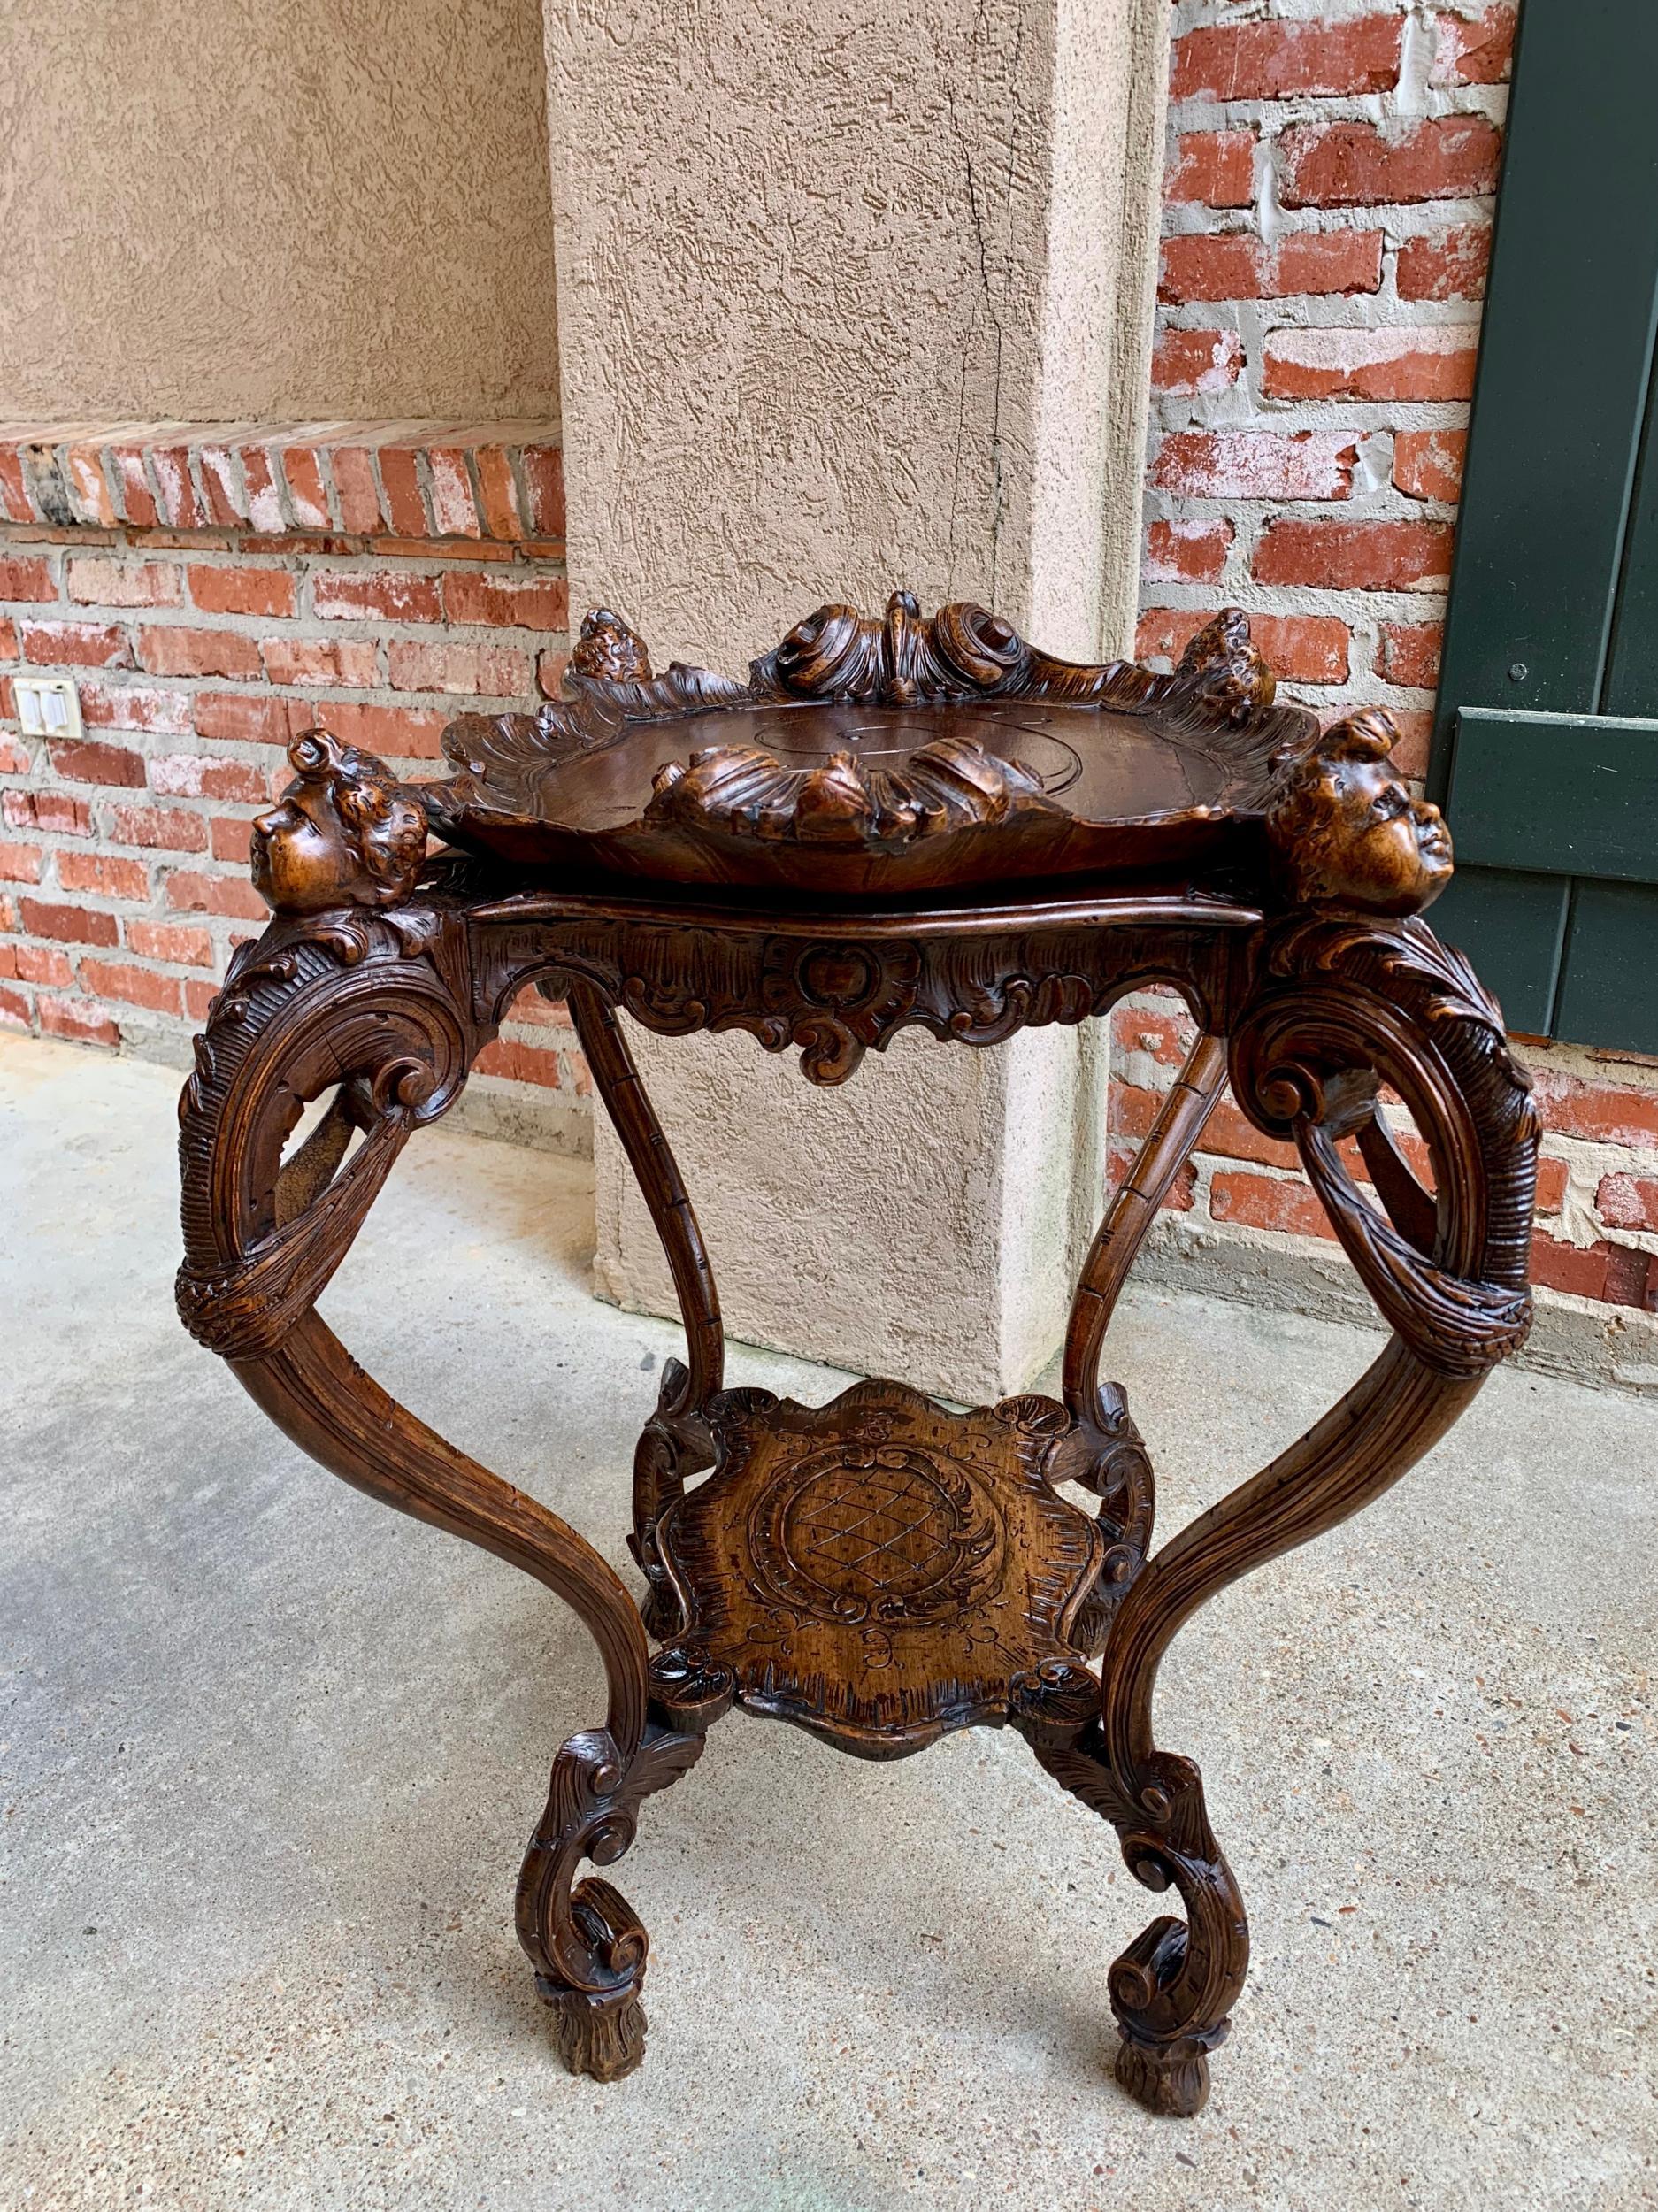 19th century French Carved Oak Sofa Dessert Table Serving Tray Louis XV Cherub For Sale 3